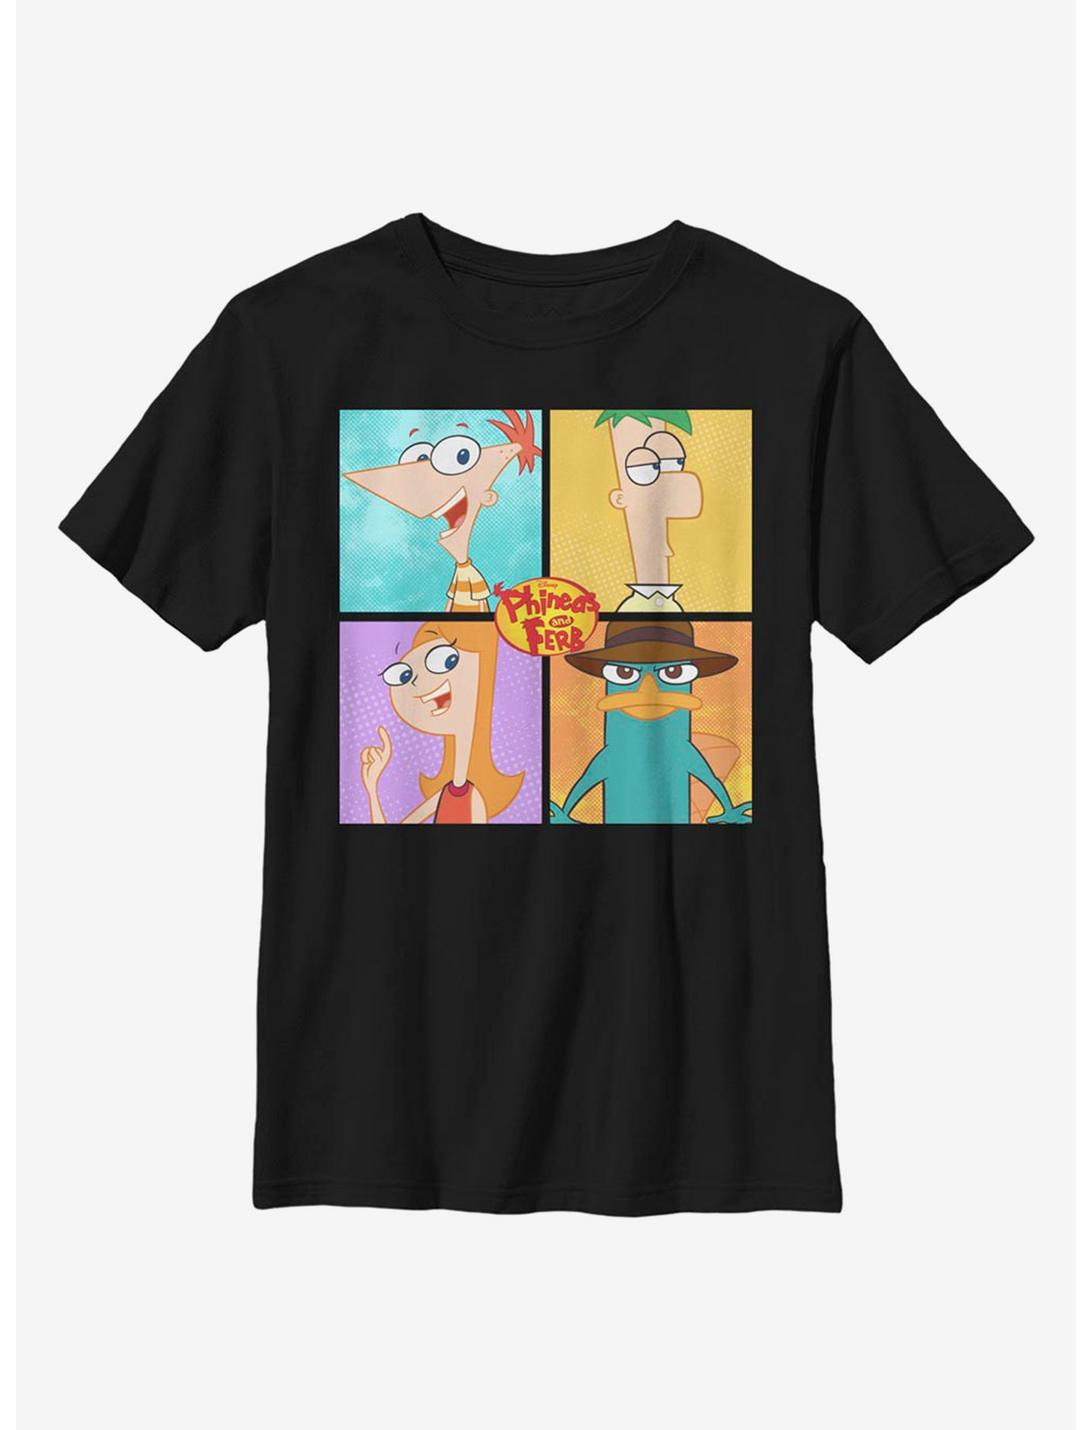 Disney Phineas And Ferb Character Box Up Youth T-Shirt, BLACK, hi-res